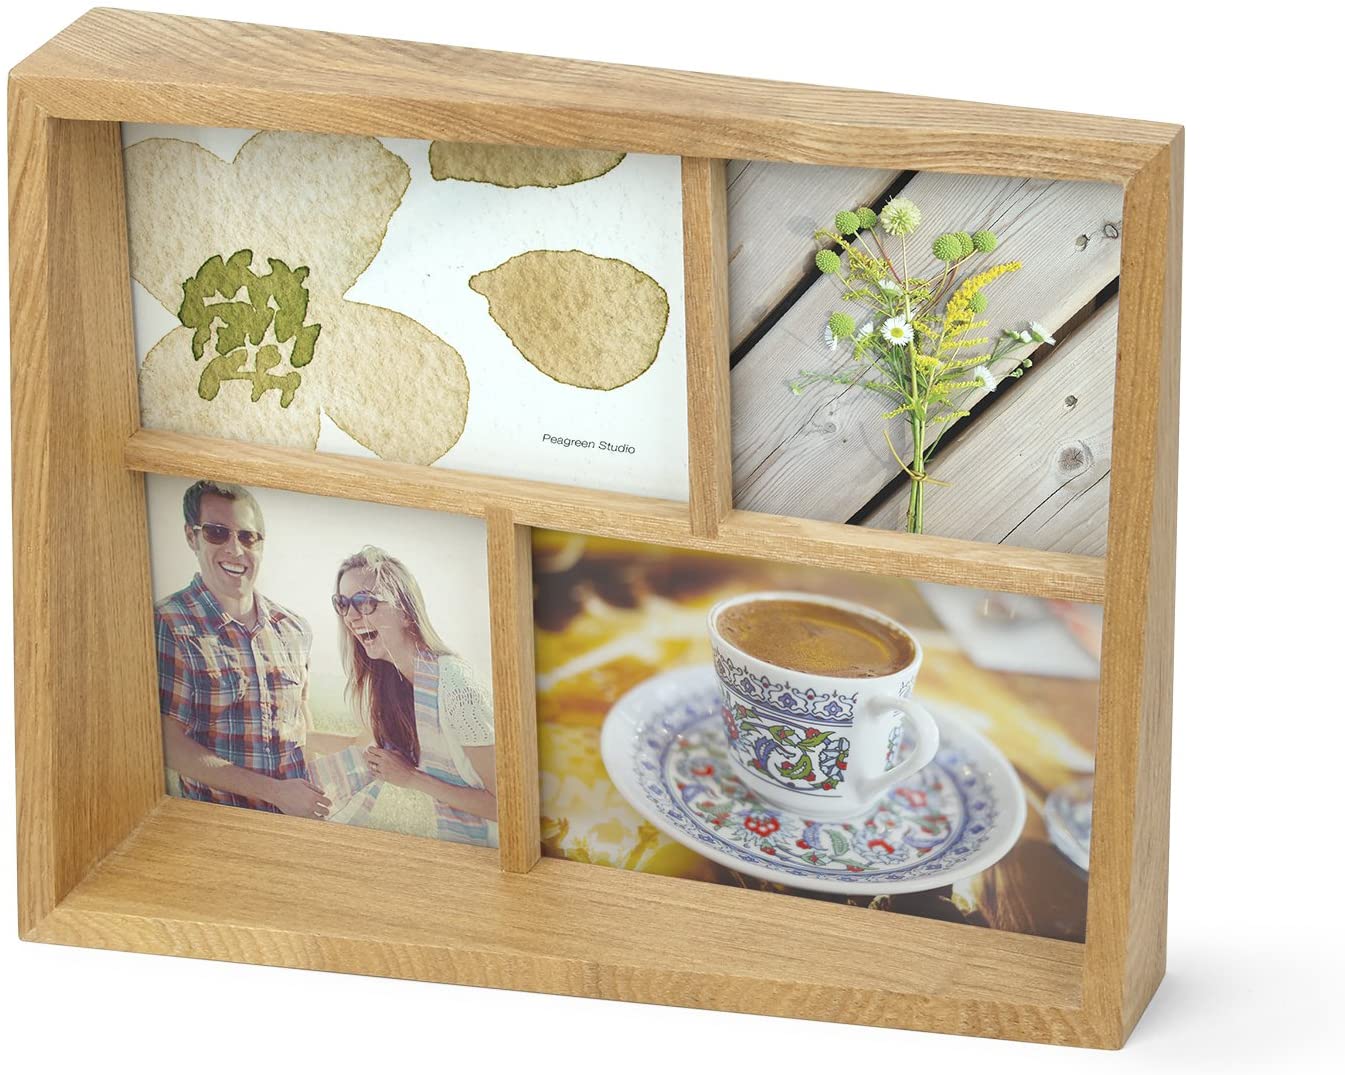 Umbra Edge Collage Picture Frame for 4 Photos, Pictures, Art Prints, Illustrations, Graphics and More - Modern Wall and Table Multi-Picture Frame Made of Ash Wood, Natural